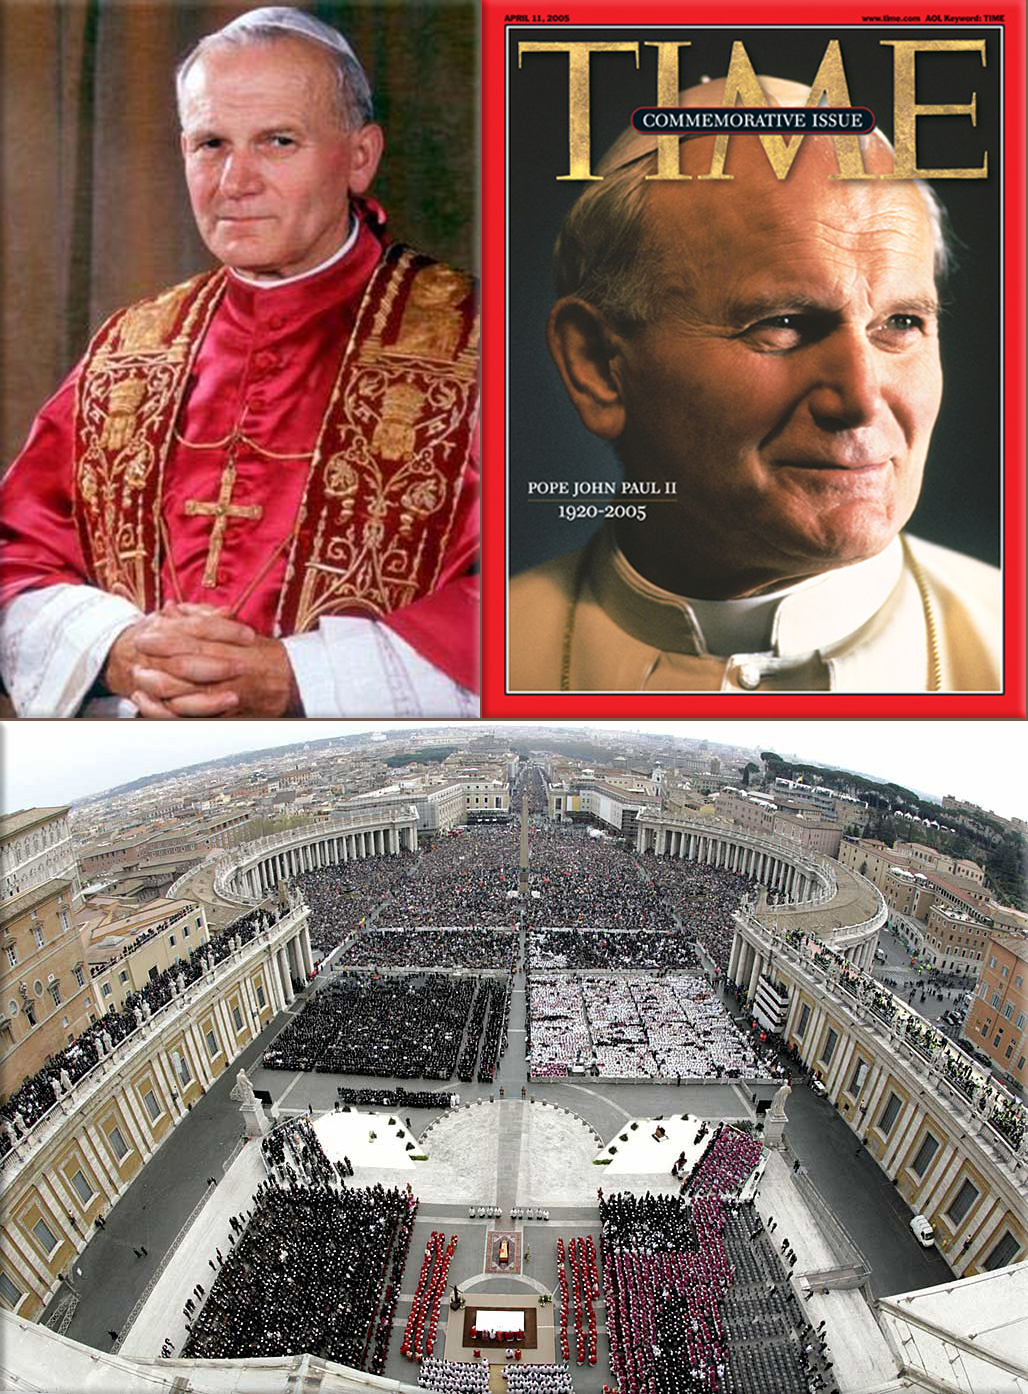 Pope John Paul II: 1920-2005 ● April 11th, 2005 edition Time Cover ● Arial view of the funeral of John Paul II where 4 million attended.